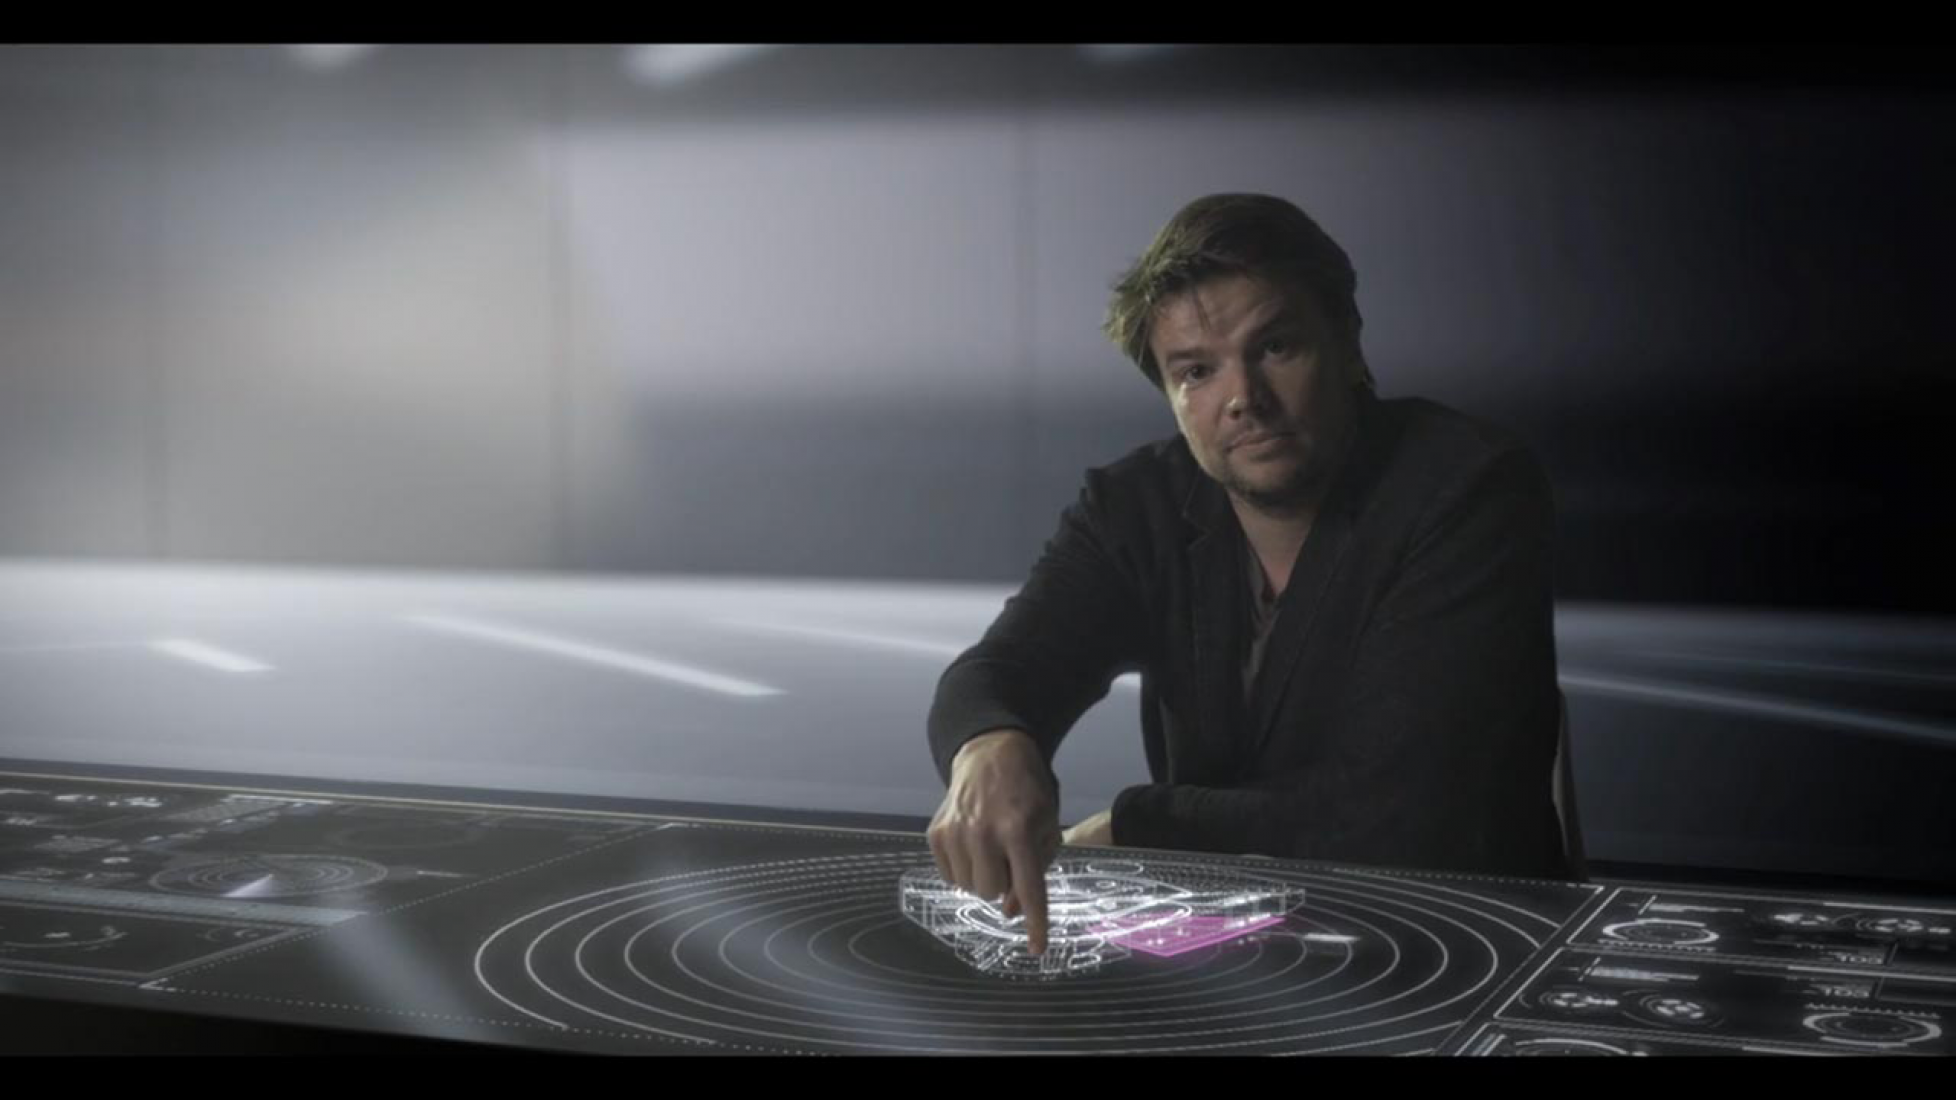 Europa City by Bjarke Ingels, BIG Group. Video-images by Squint/Opera